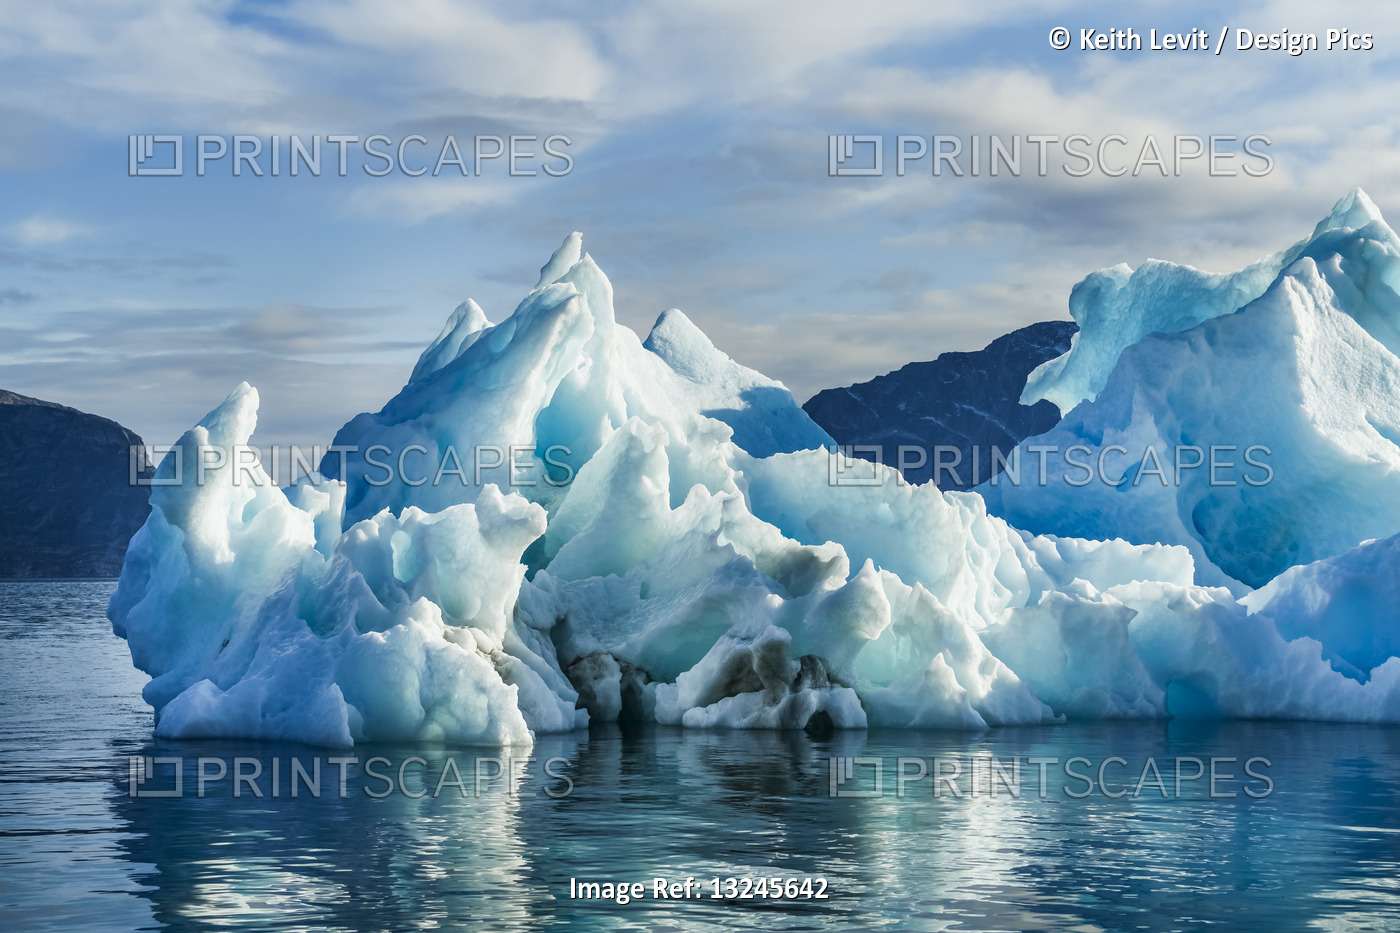 Glacial ice formations along the coast of Greenland; Sermersooq, Greenland